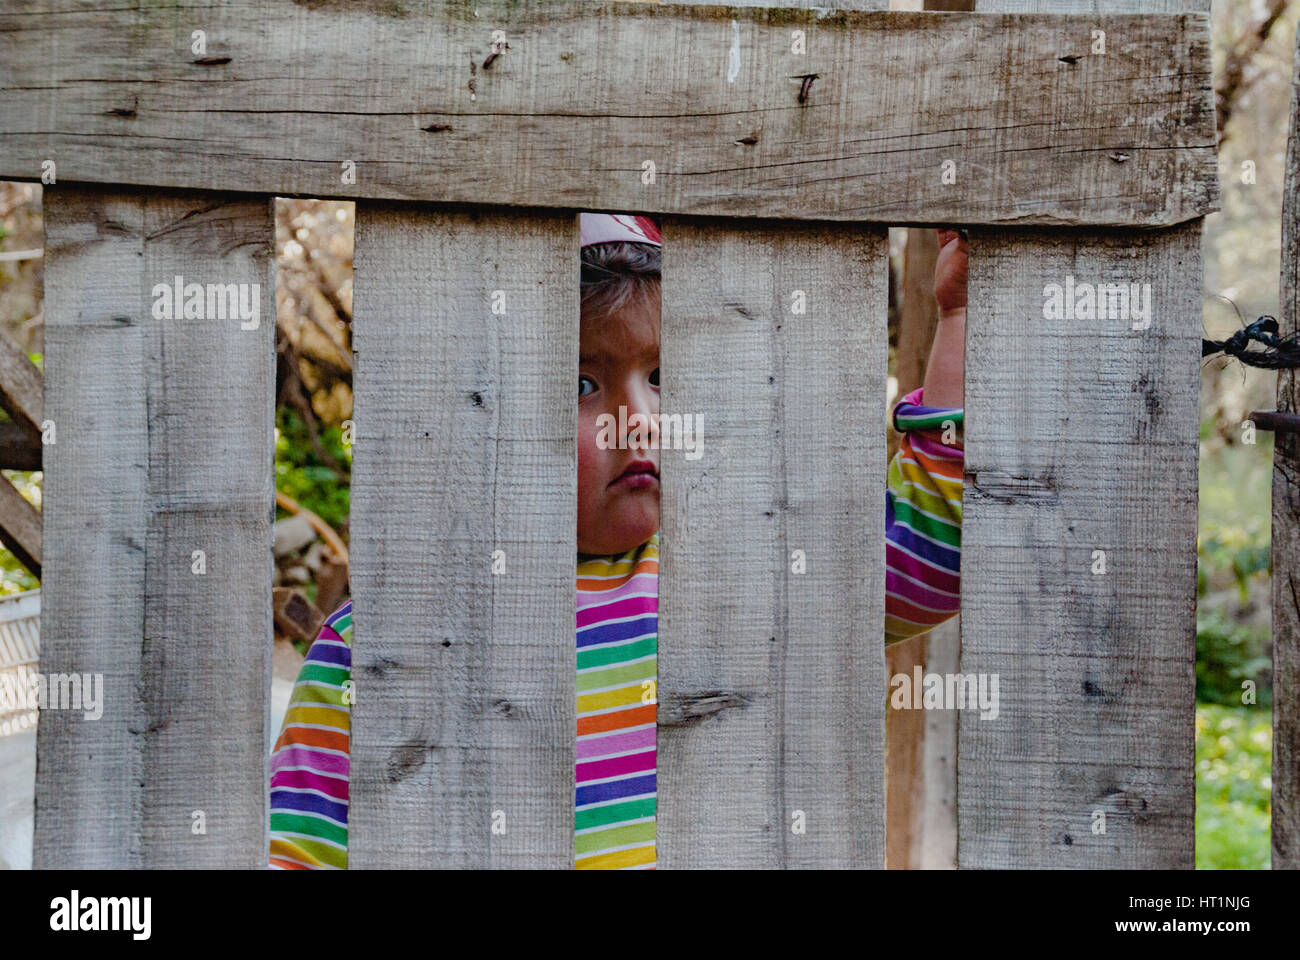 shy baby girl behind the wooden fence outdoor,looking inquisitive Stock Photo